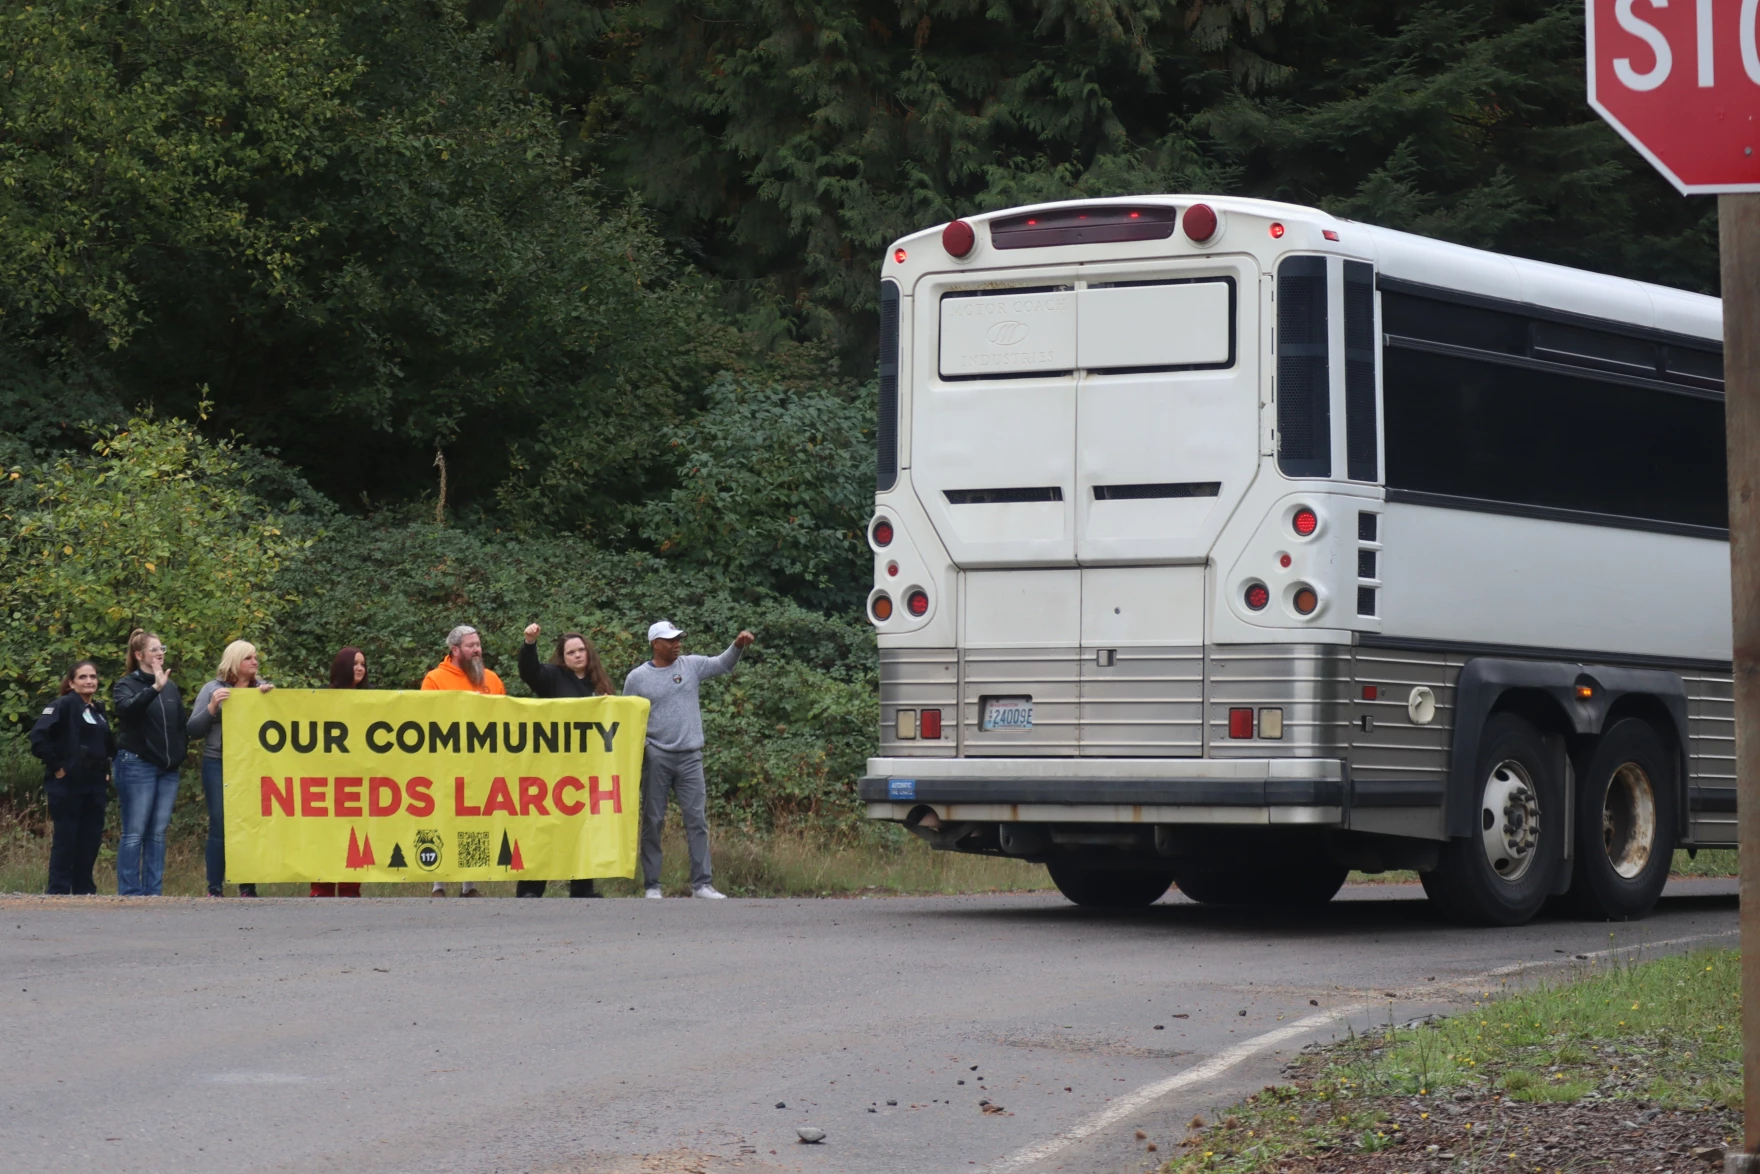 A handful of people stand holding a bright yellow banner that reads "Our Community Needs Larch" as the back of a bus is seen driving past them.